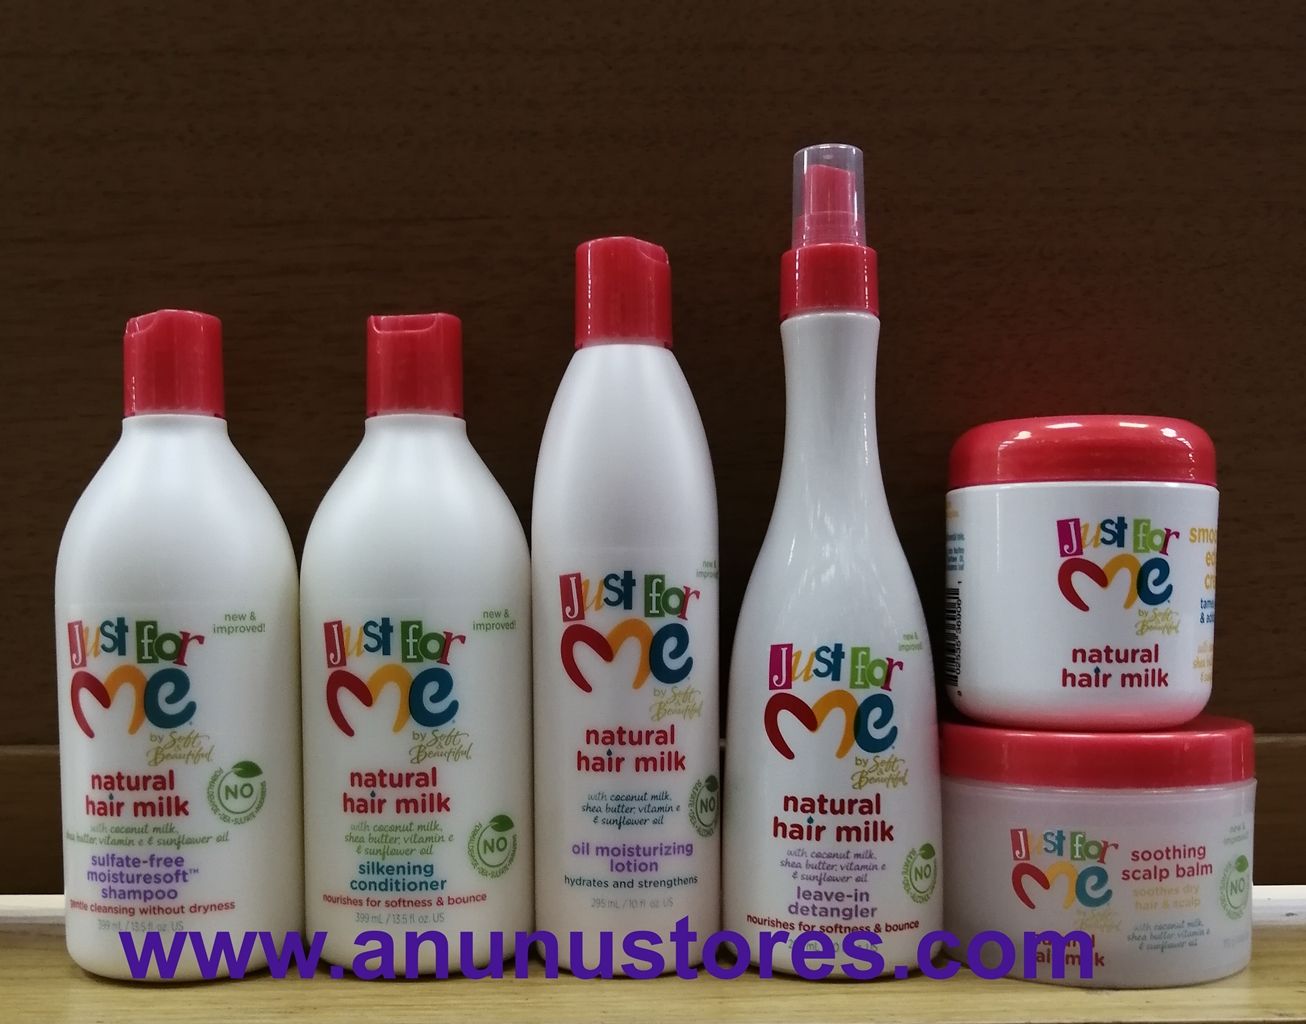 Just for Me Kids Hair Products